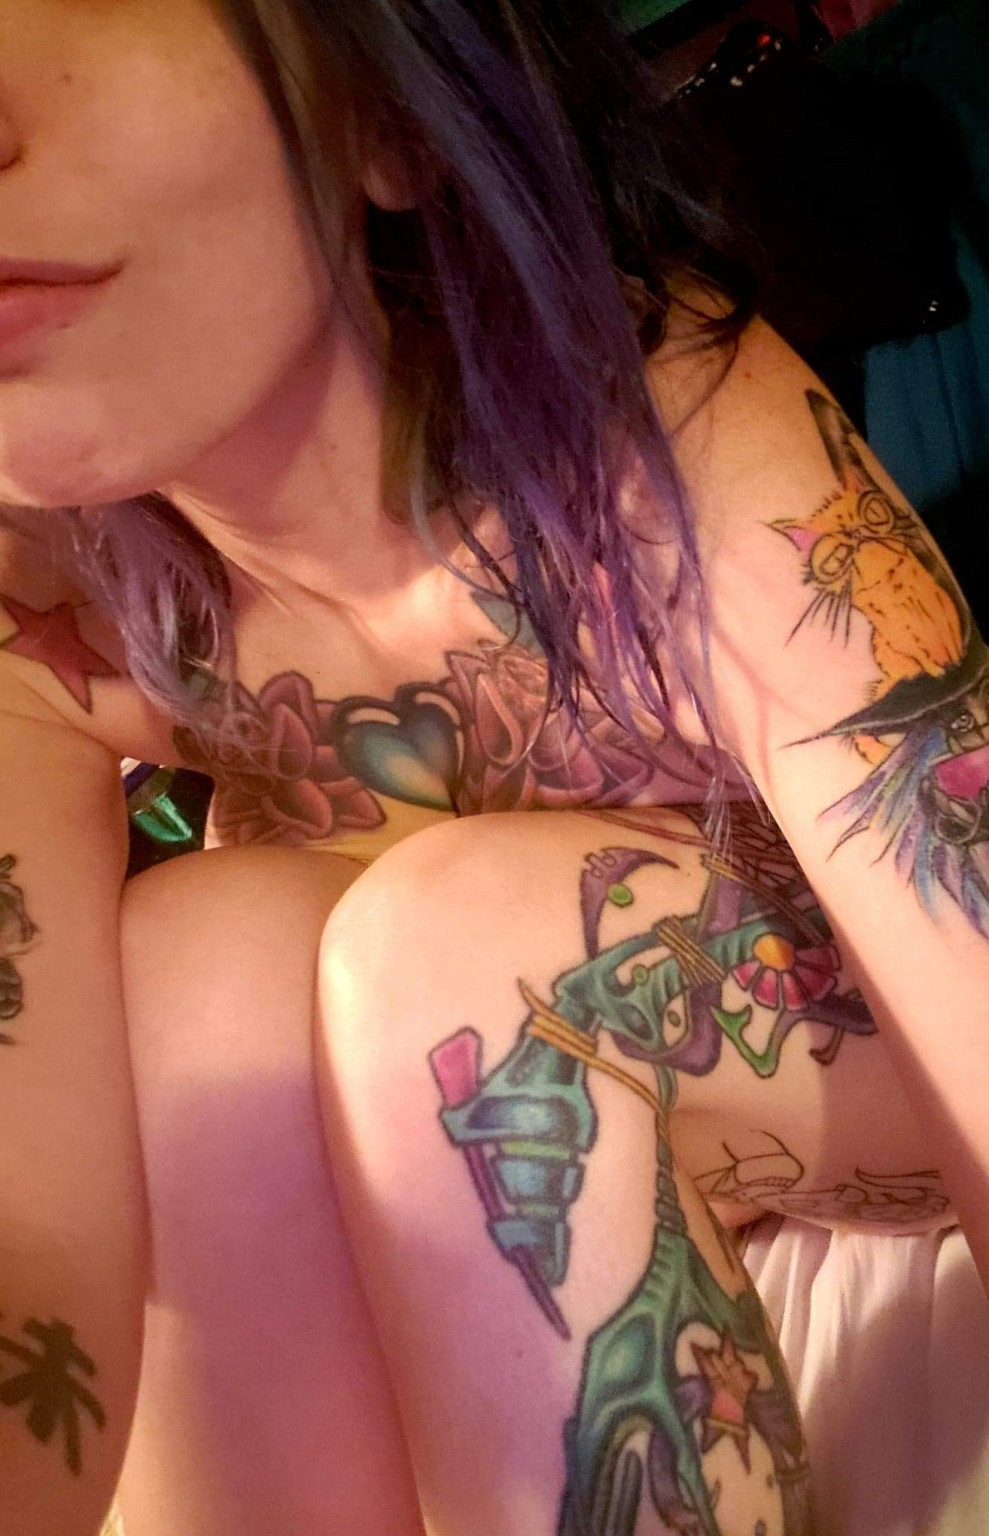 Here’s A Gallery For Those Of You Asking About My Tattoos!